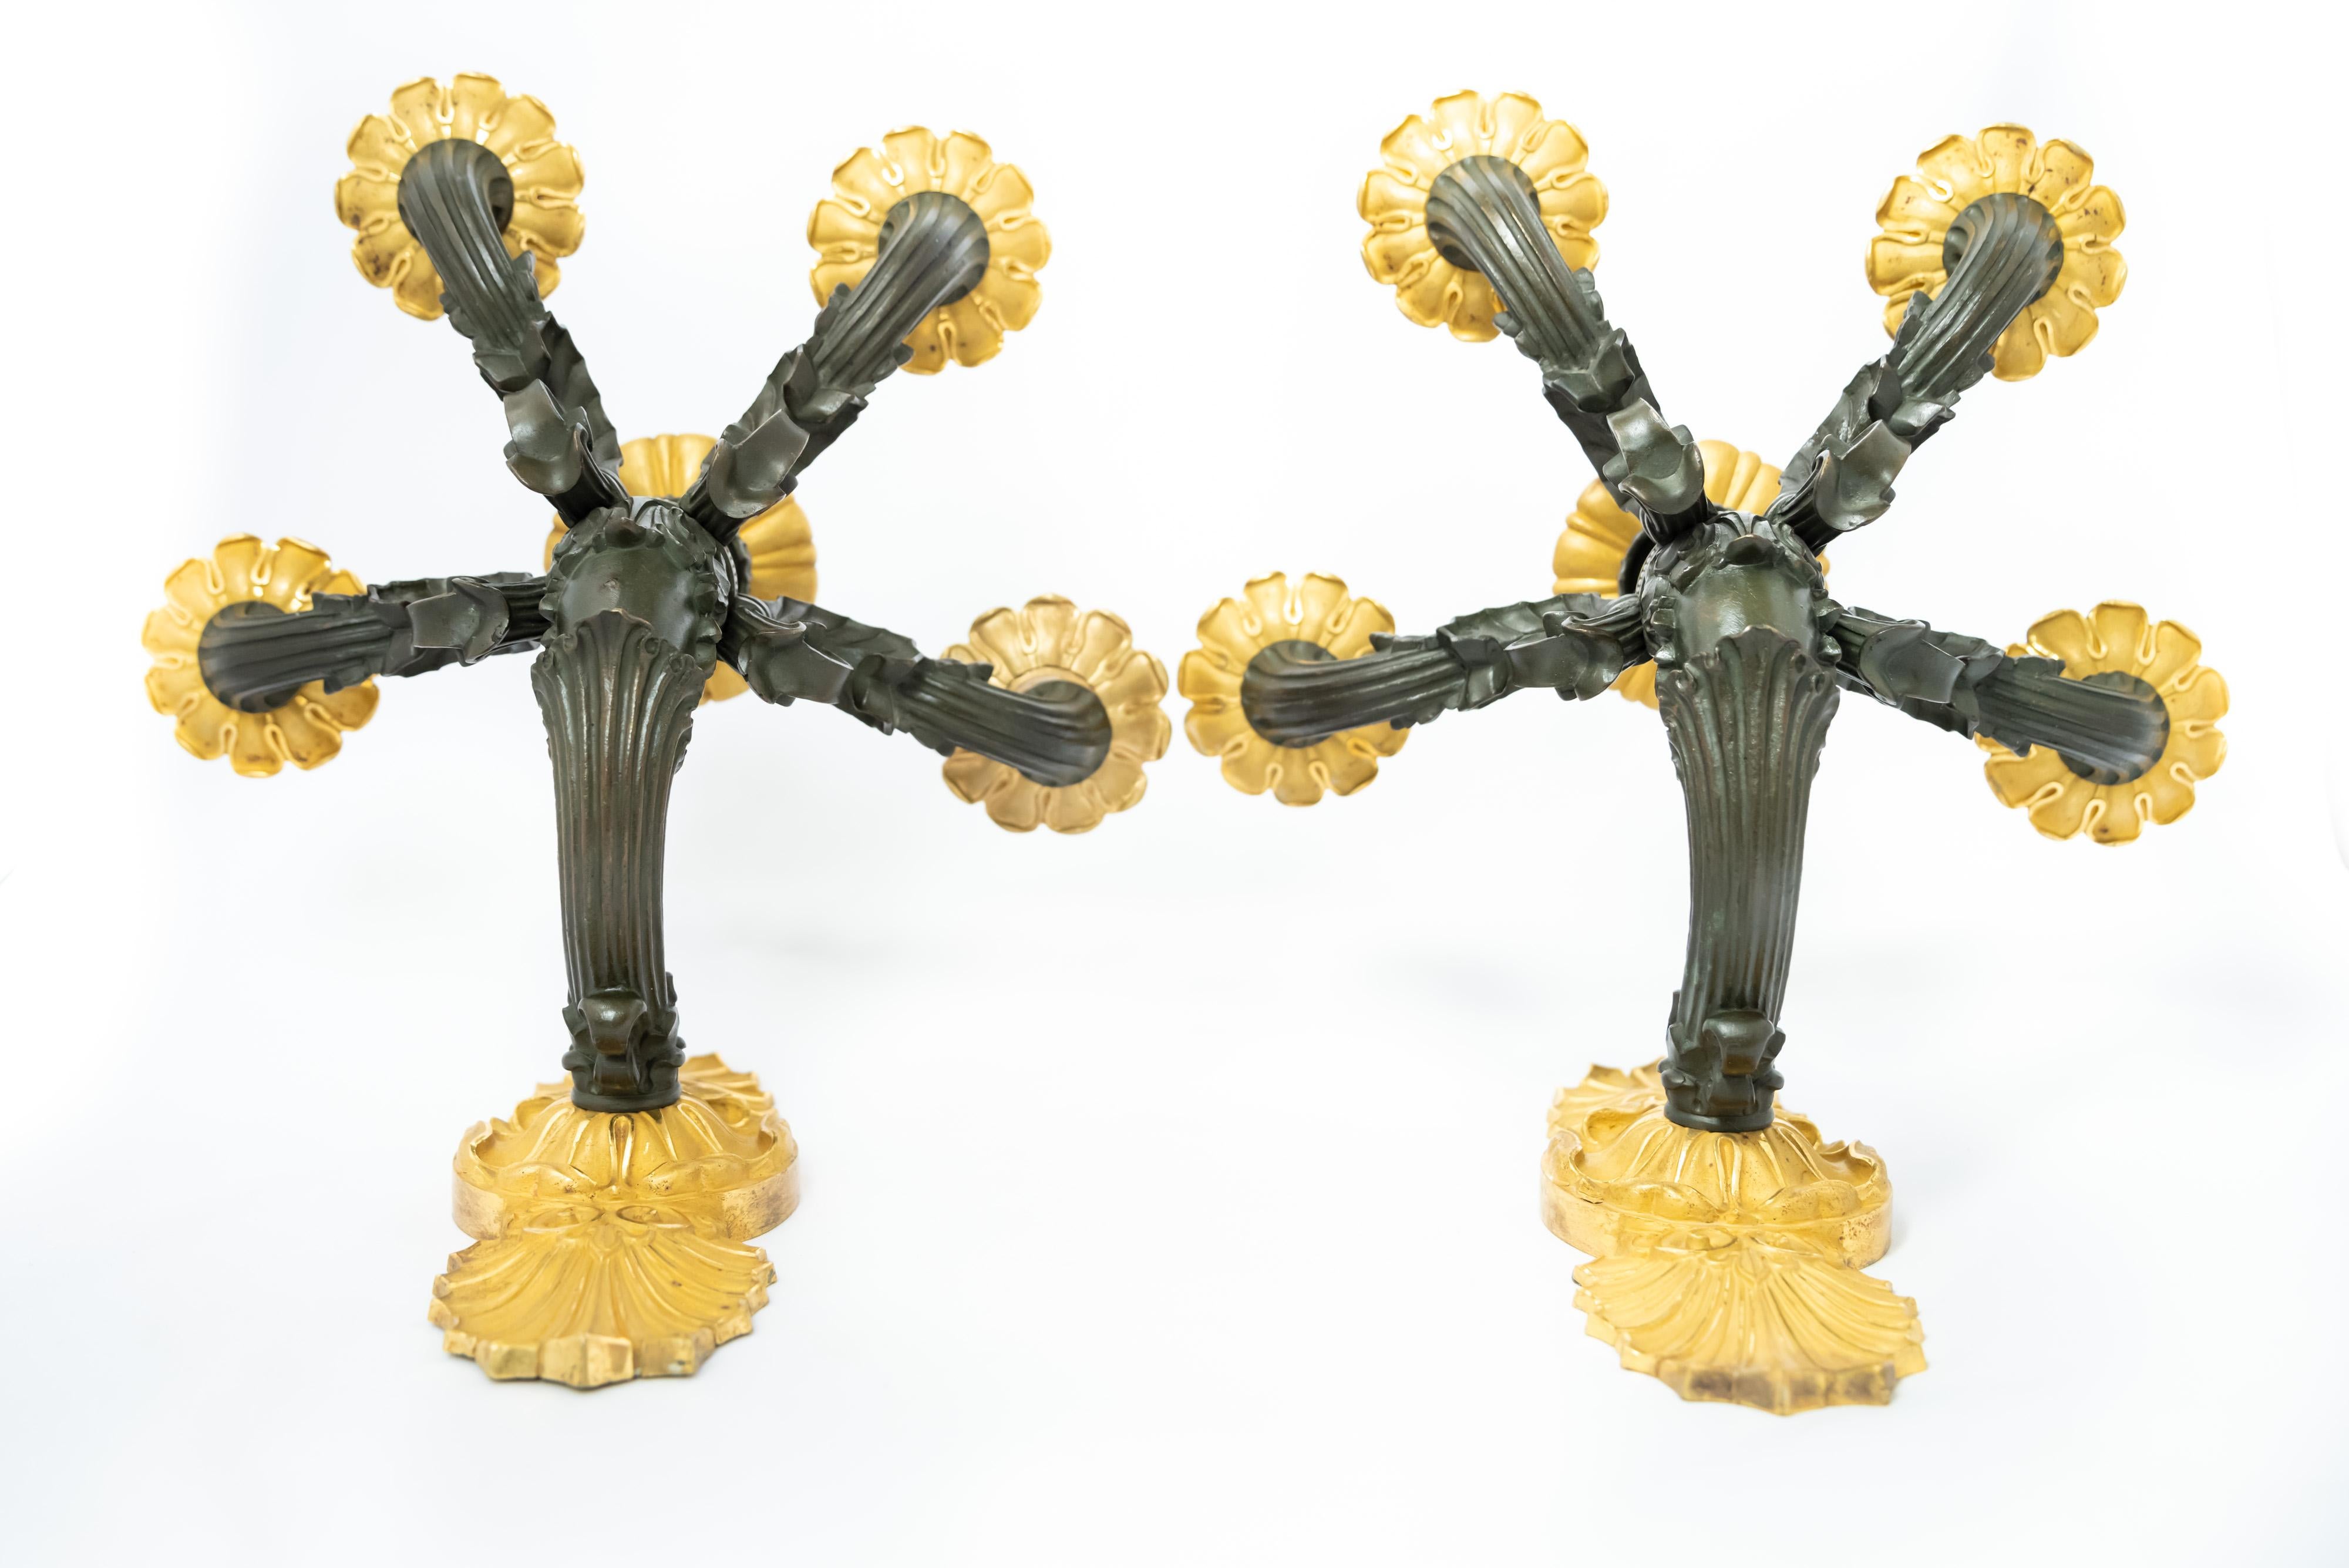 An exquisite pair of gilt-bronze and black-patina sconces - appliqués - from the French Restauration Era. The pair revels in the acanthus-leaf iconography of classicism to an almost abstract degree, with the gilt acanthus of the backplate supporting